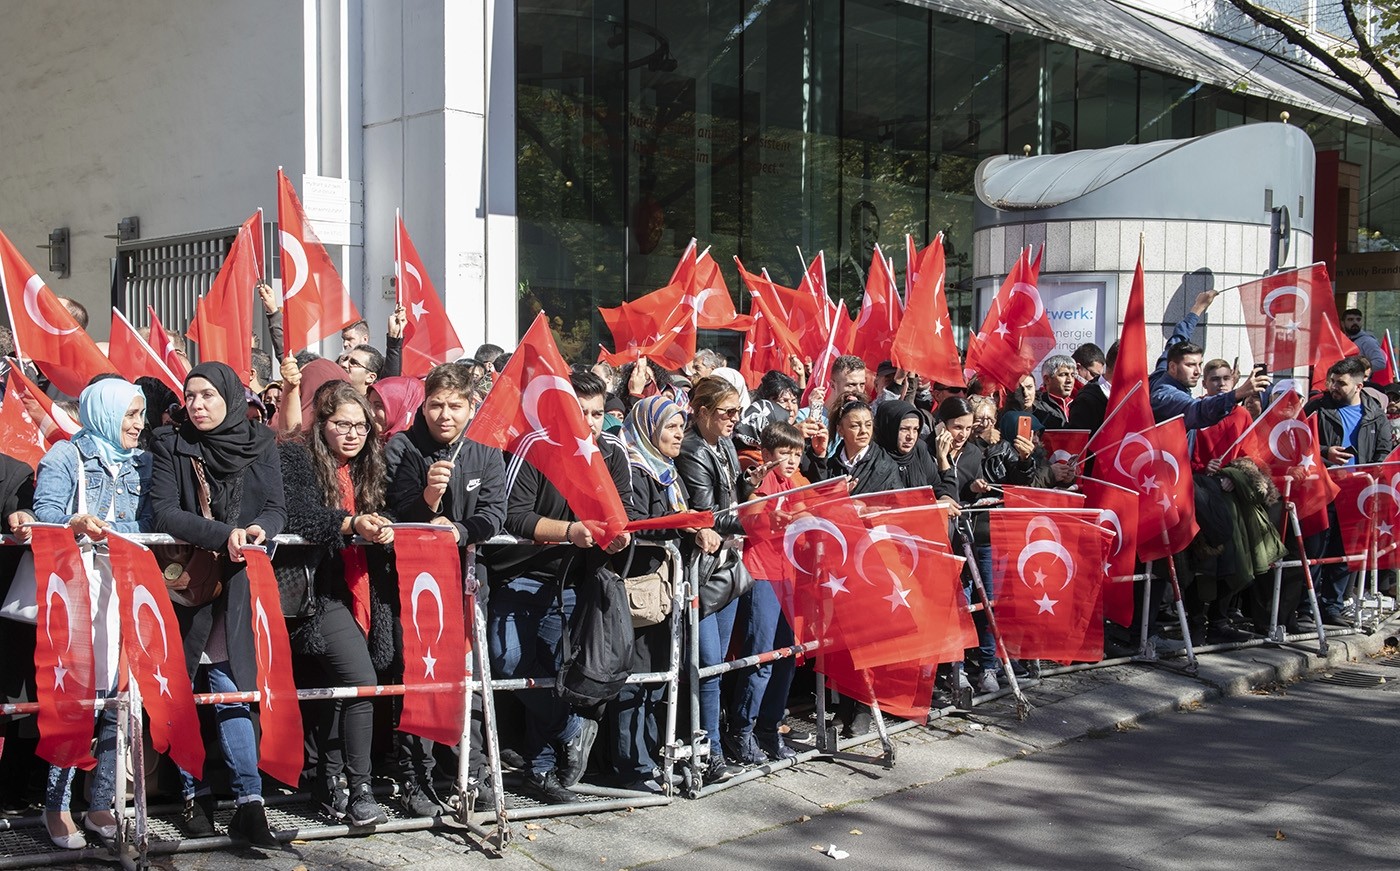 Fans of Turkish President Recep Tayyip Erdoğan hold Turkish flags while waiting for his arrival to a hotel in Berlin Thursday, Sept. 27, 2018. (AP Photo)